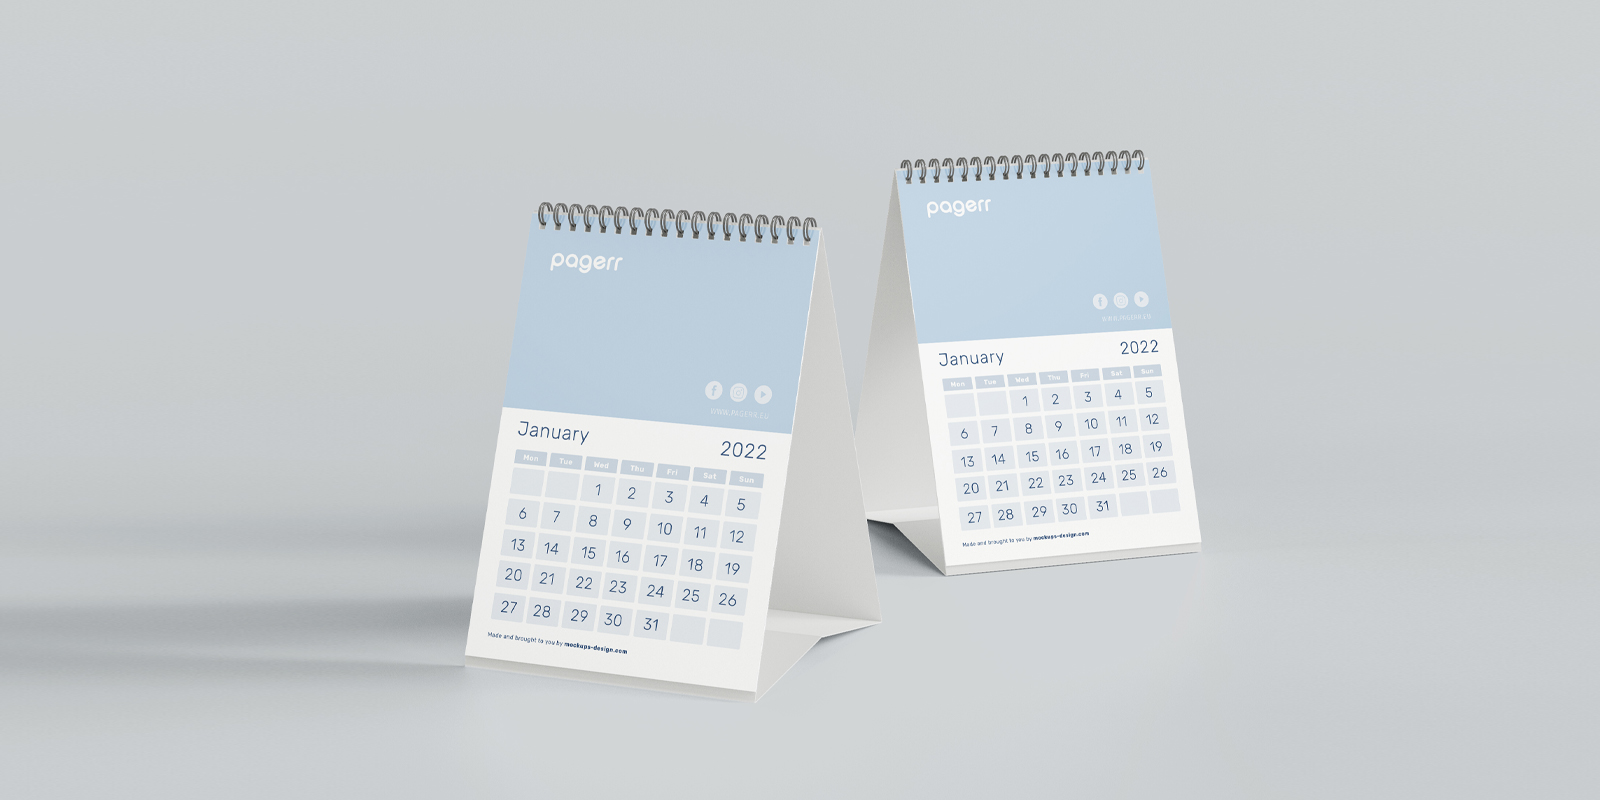 Desk calendars in Launceston - Print with Pagerr